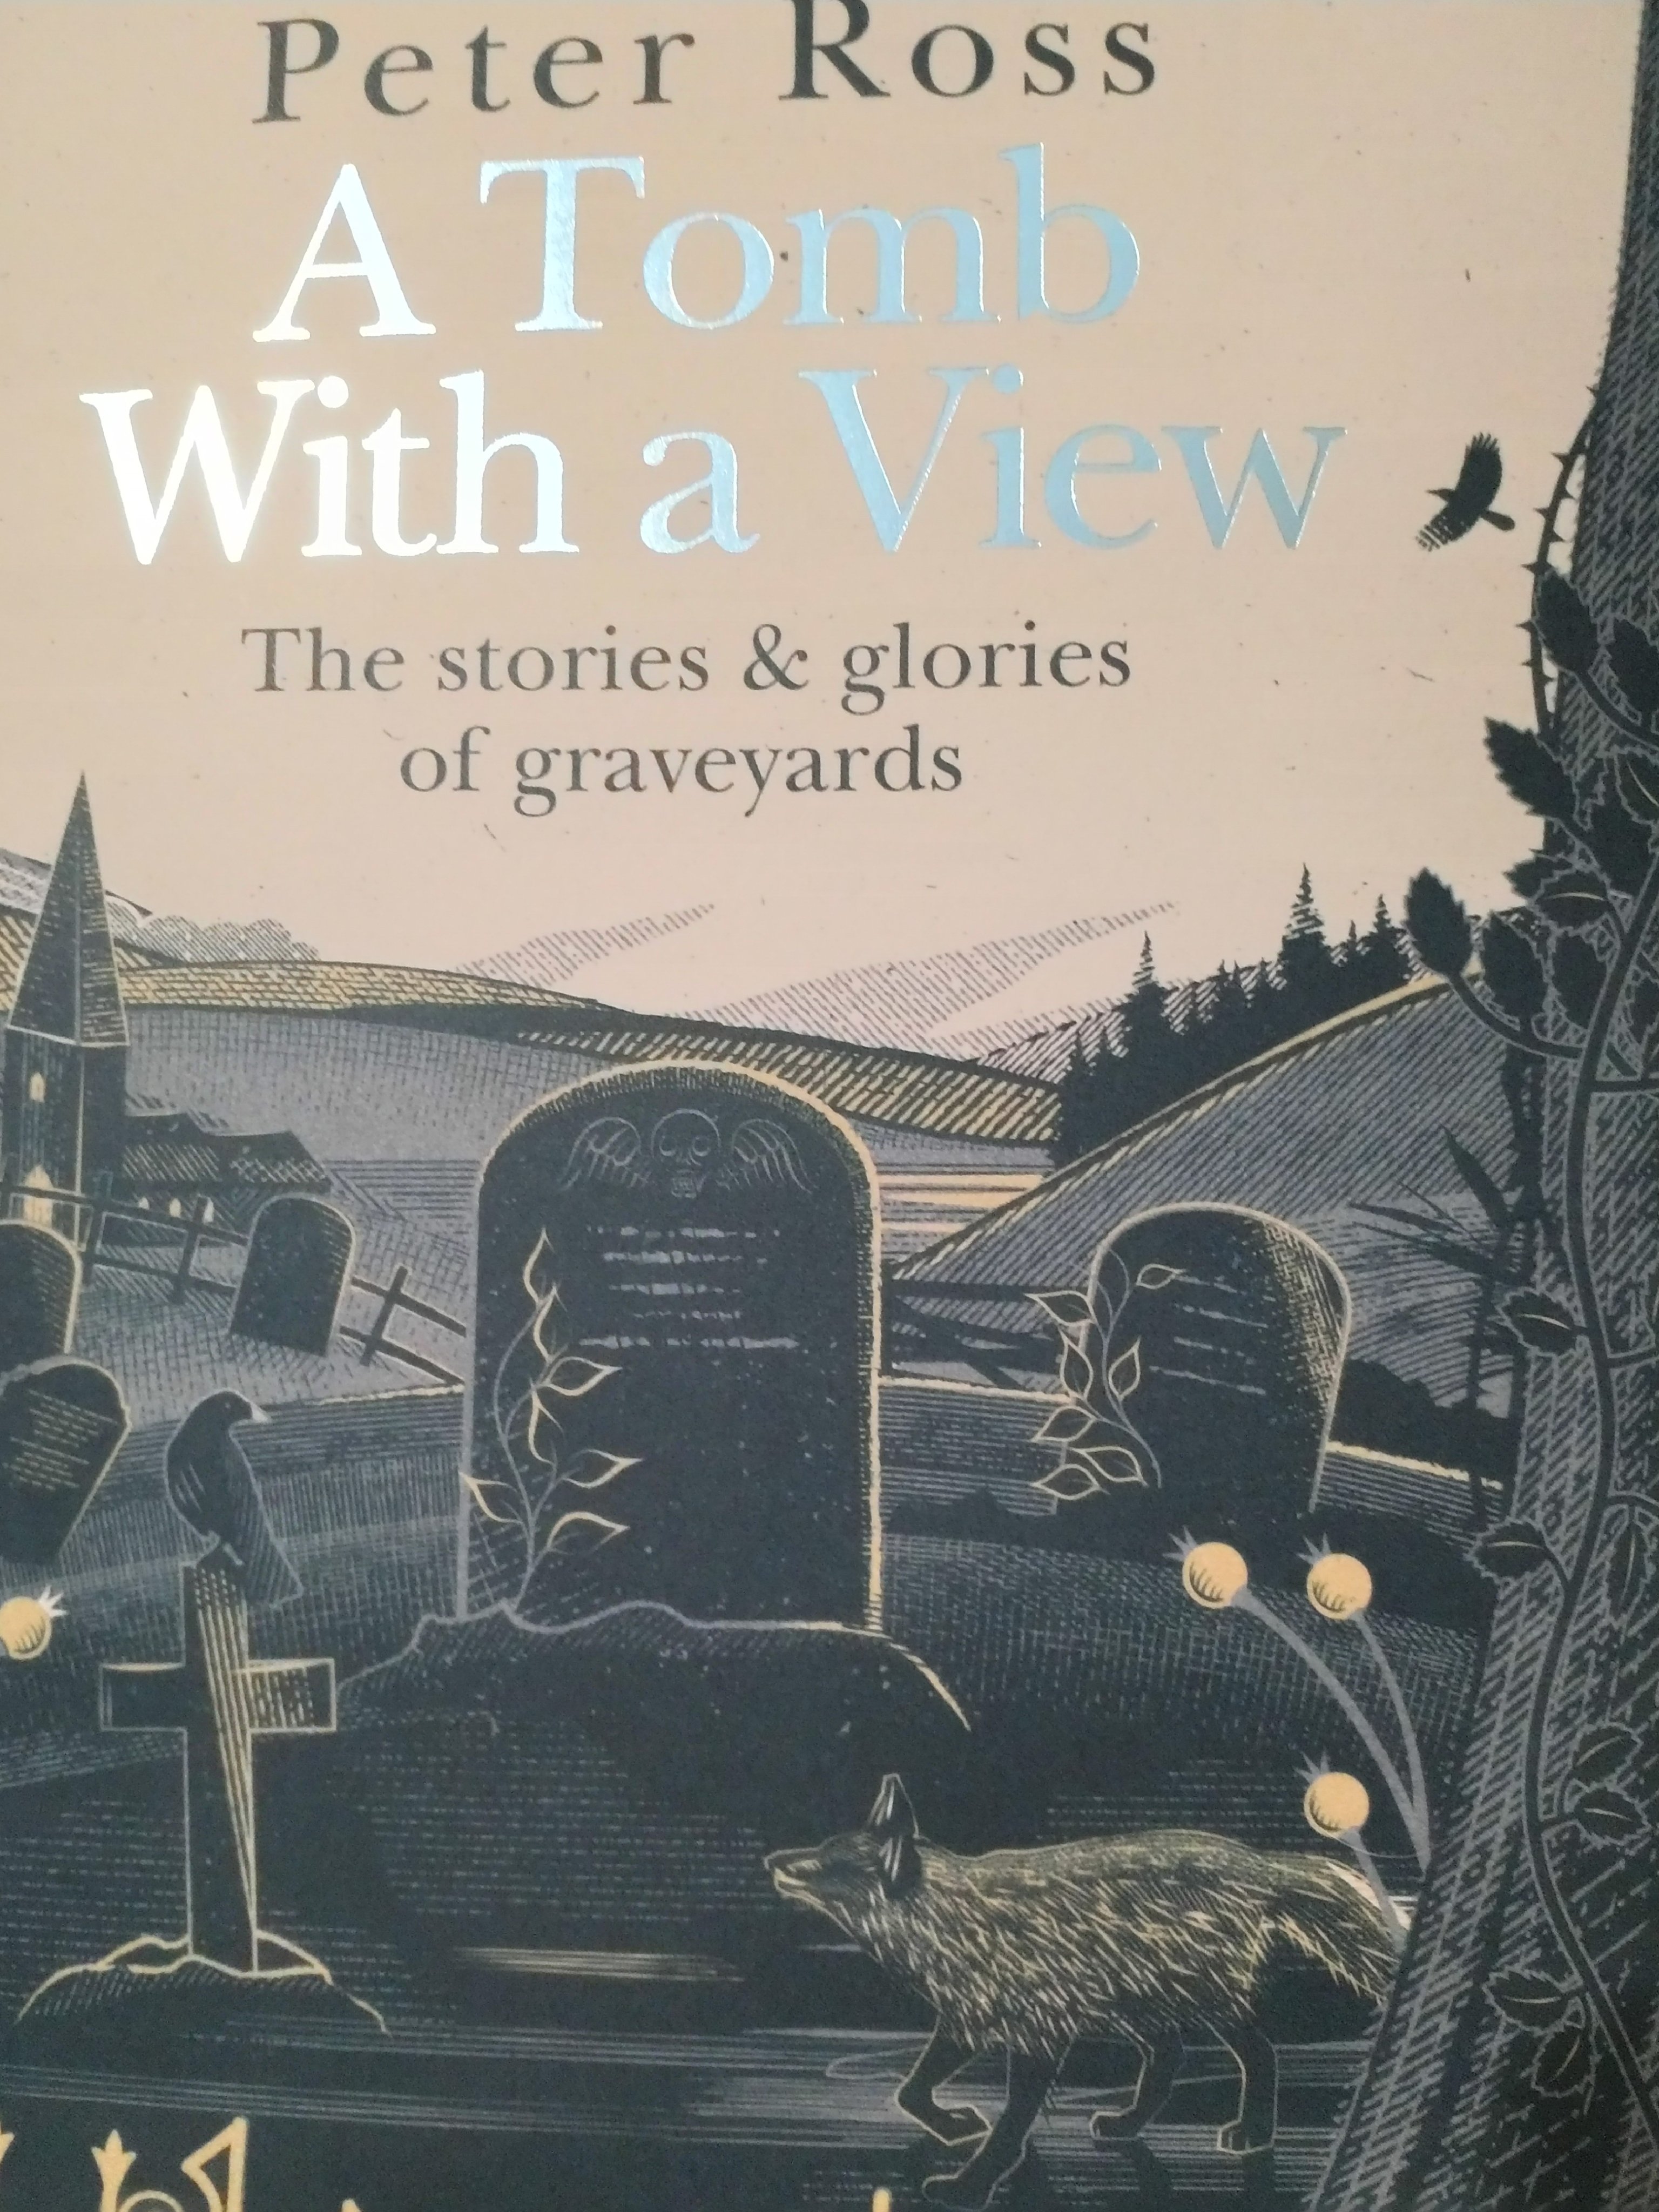 Book cover of A Tomb with a View by Peter Ross